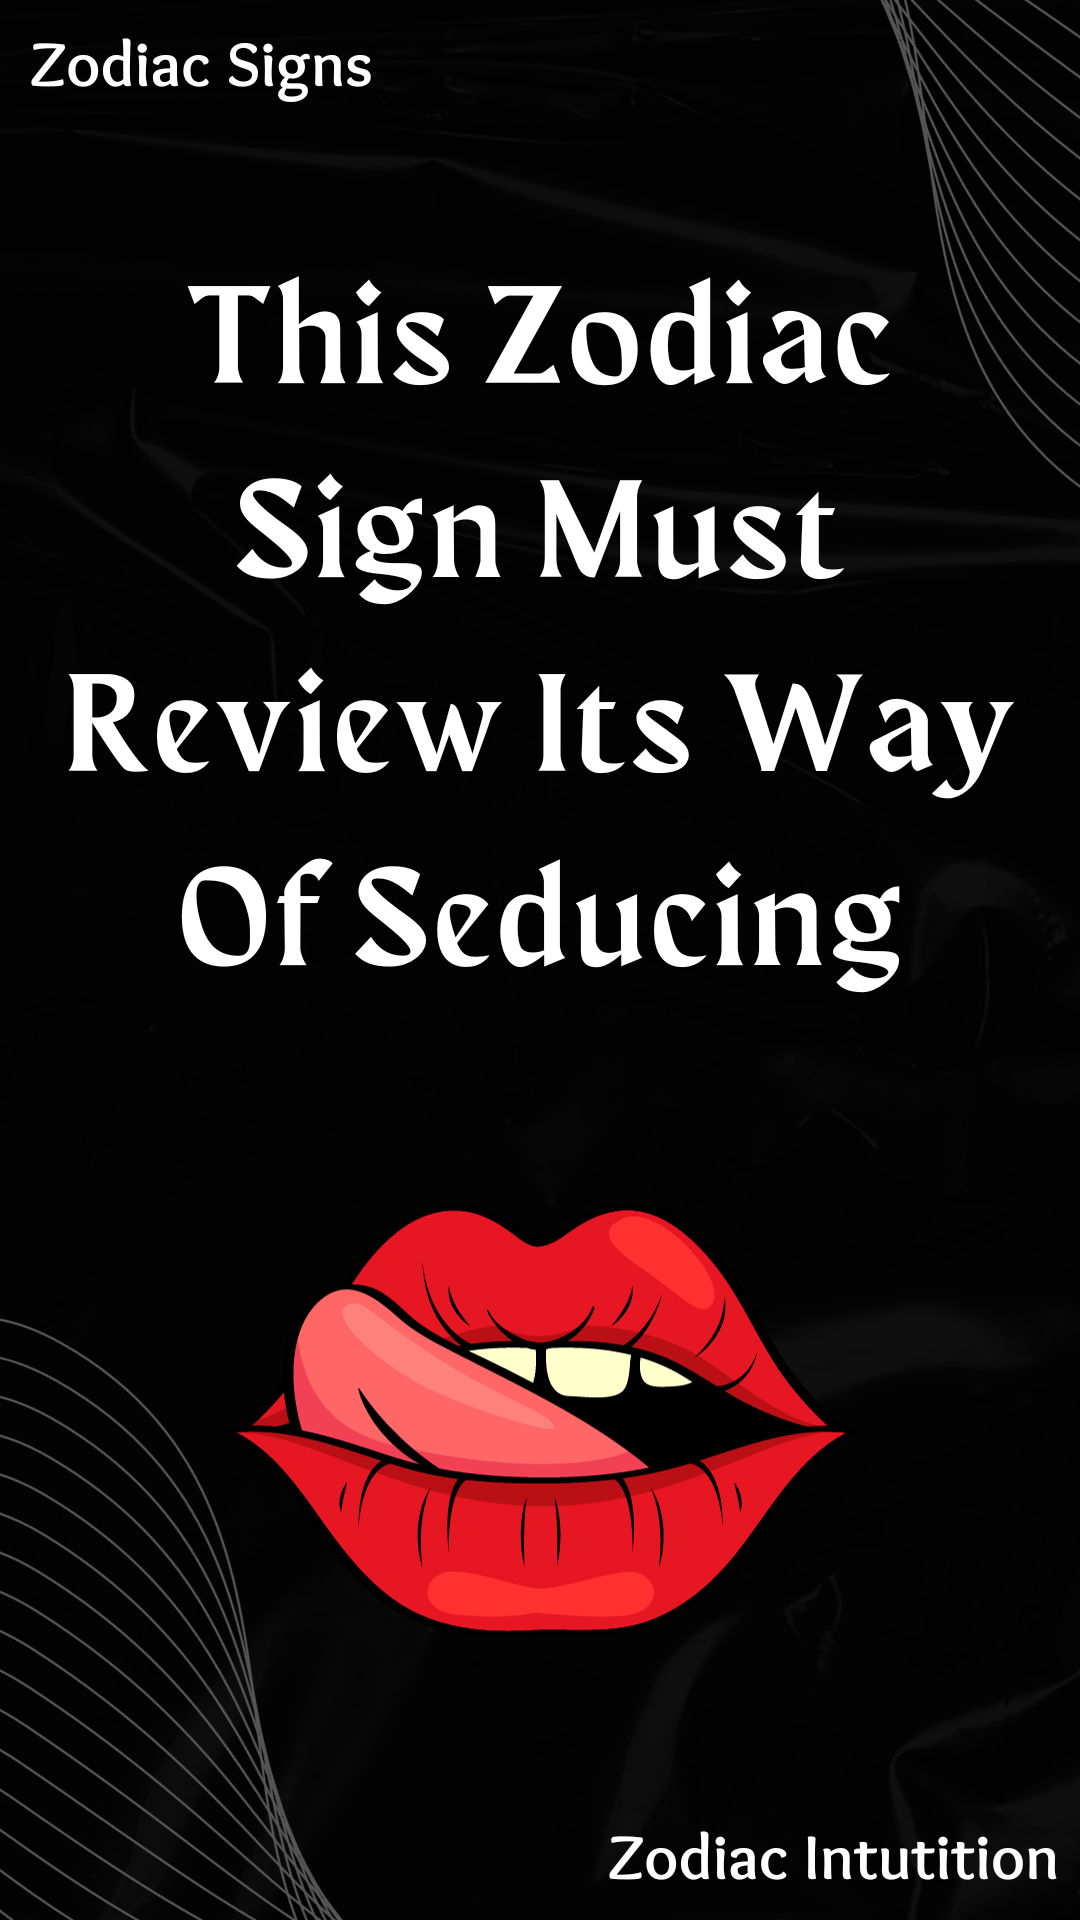 This Zodiac Sign Must Review Its Way Of Seducing